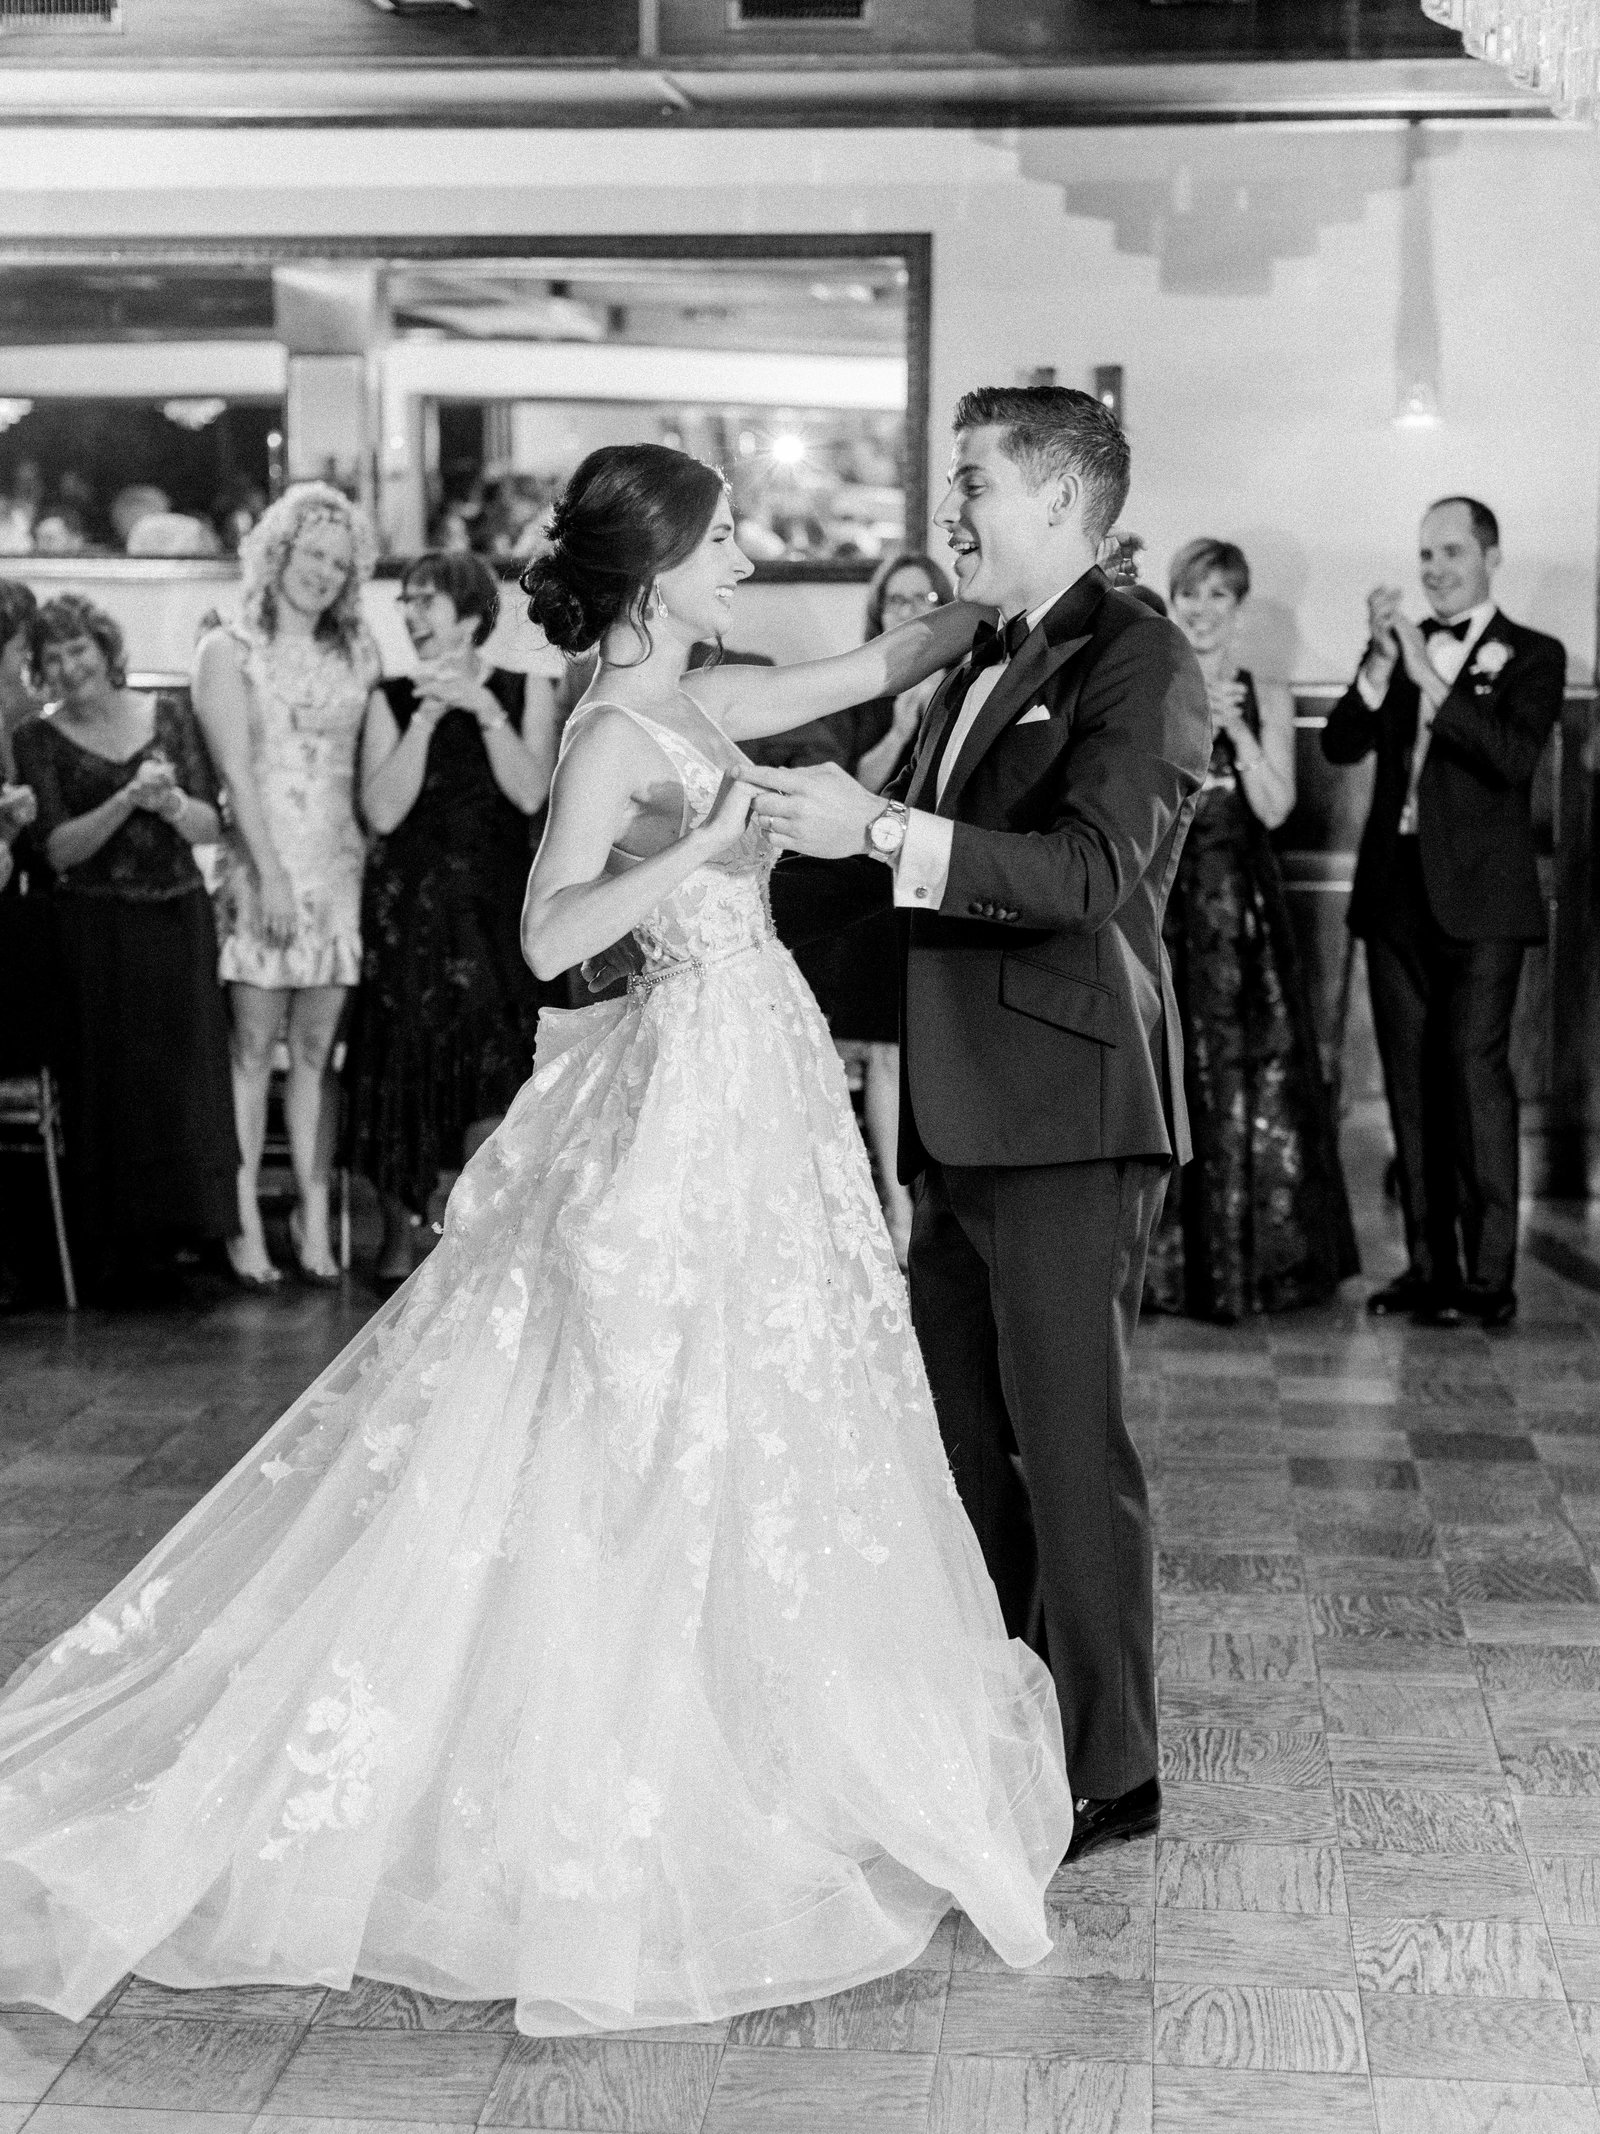 bride and groom spin around the dance floor while all their guest smile and cheer for them in the background